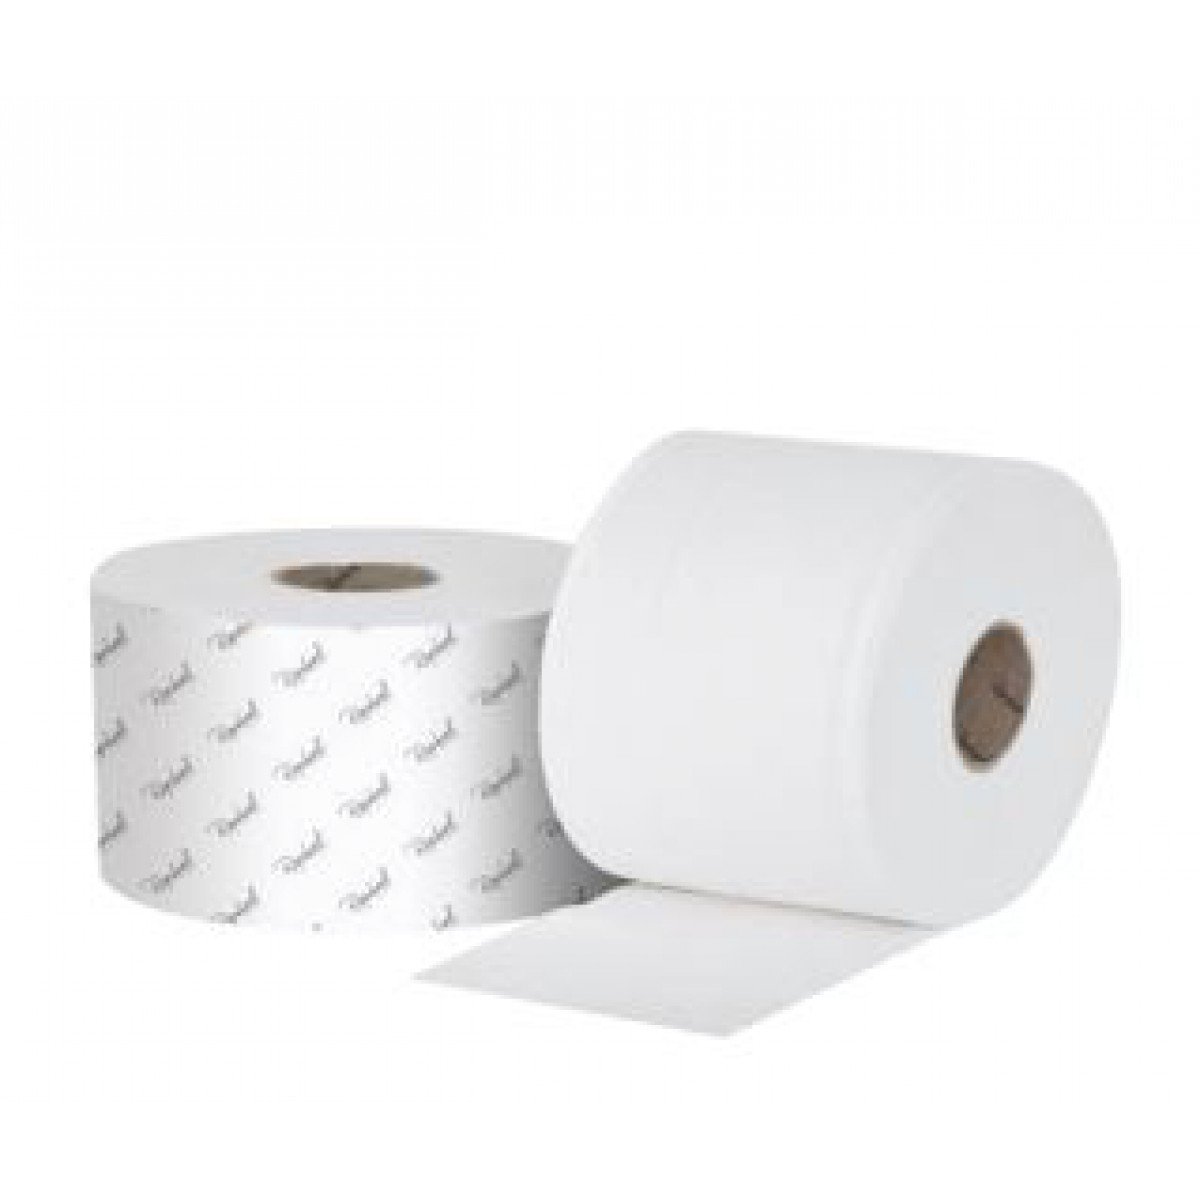 Raphael 1 Ply Toilet Roll 200m, Recycled x 24 Rolls